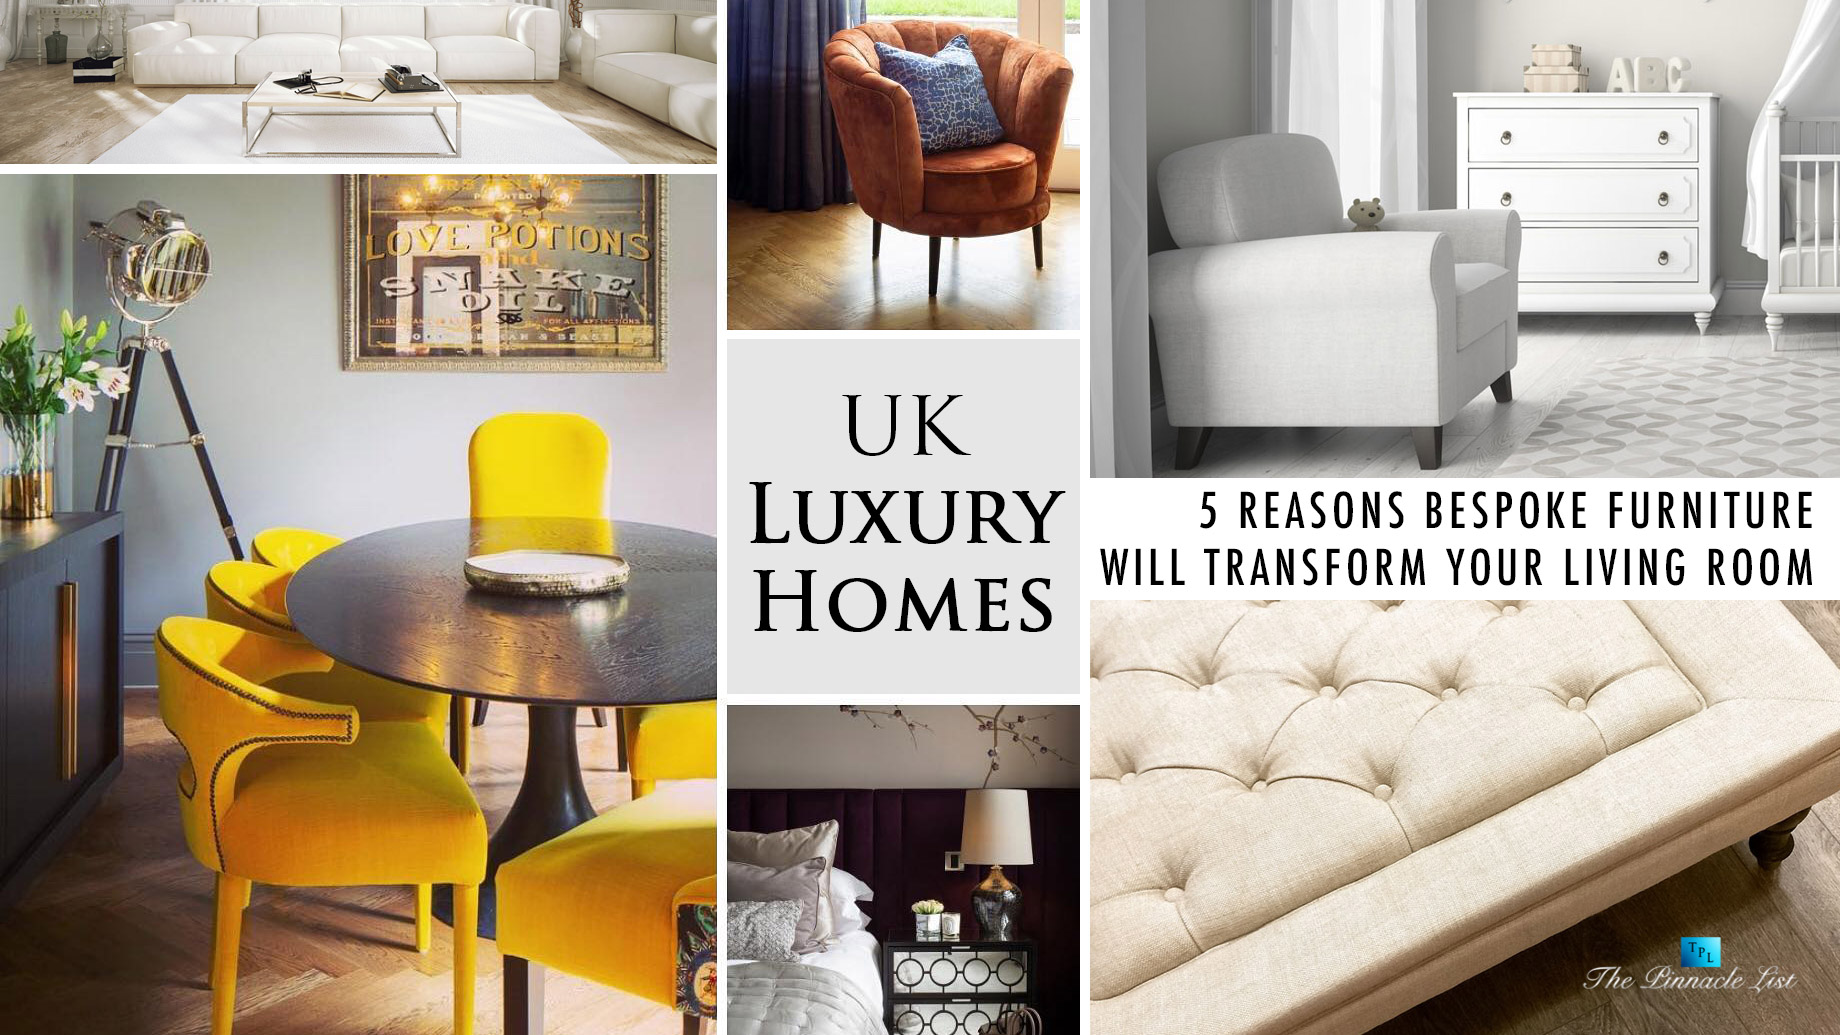 UK Luxury Homes - 5 Reasons Bespoke Furniture Will Transform Your Living Room